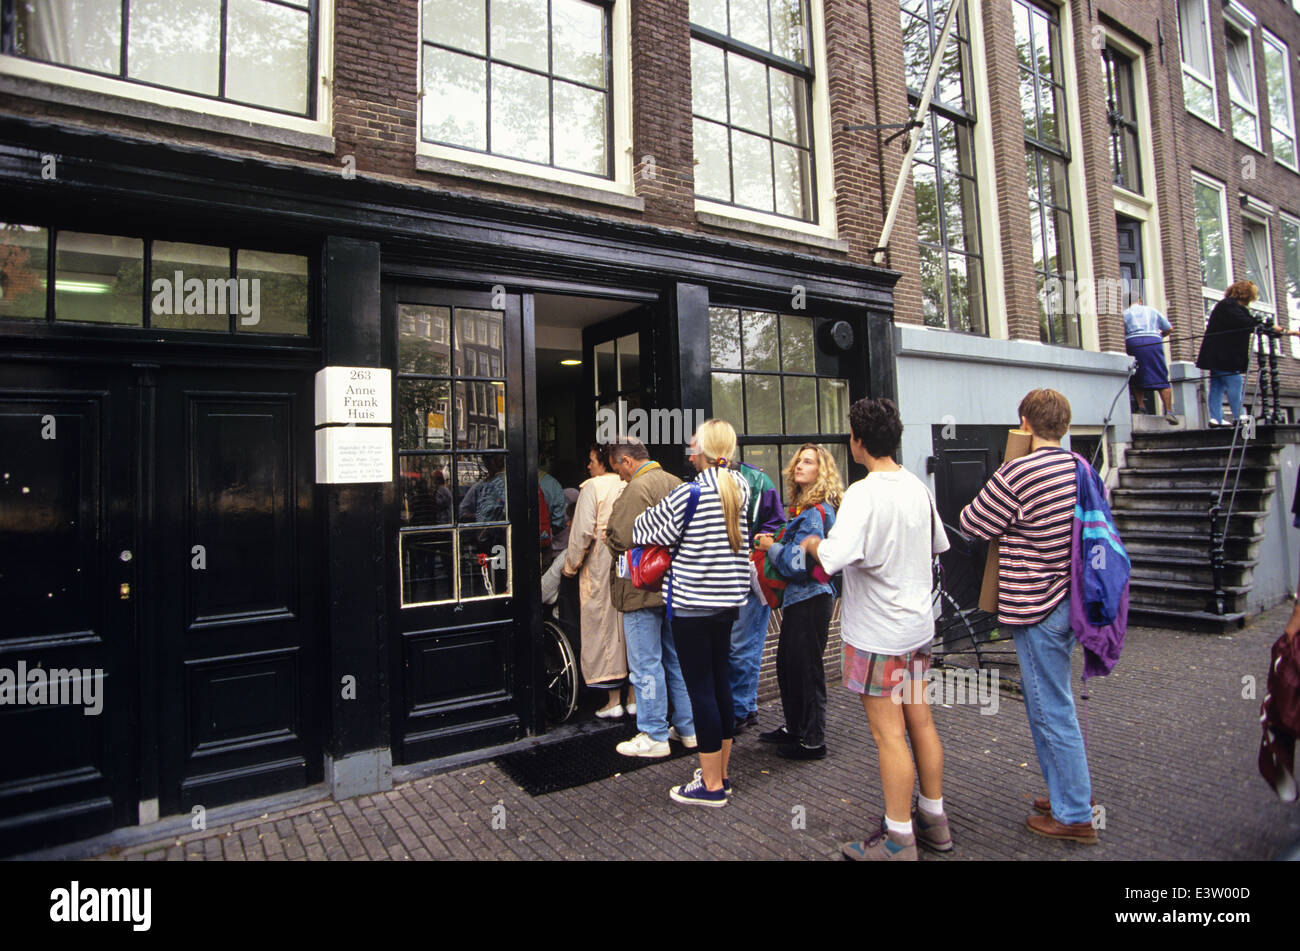 The 'Cue' starts early at AnnFrank House, Amsterdam, Holland. Stock Photo